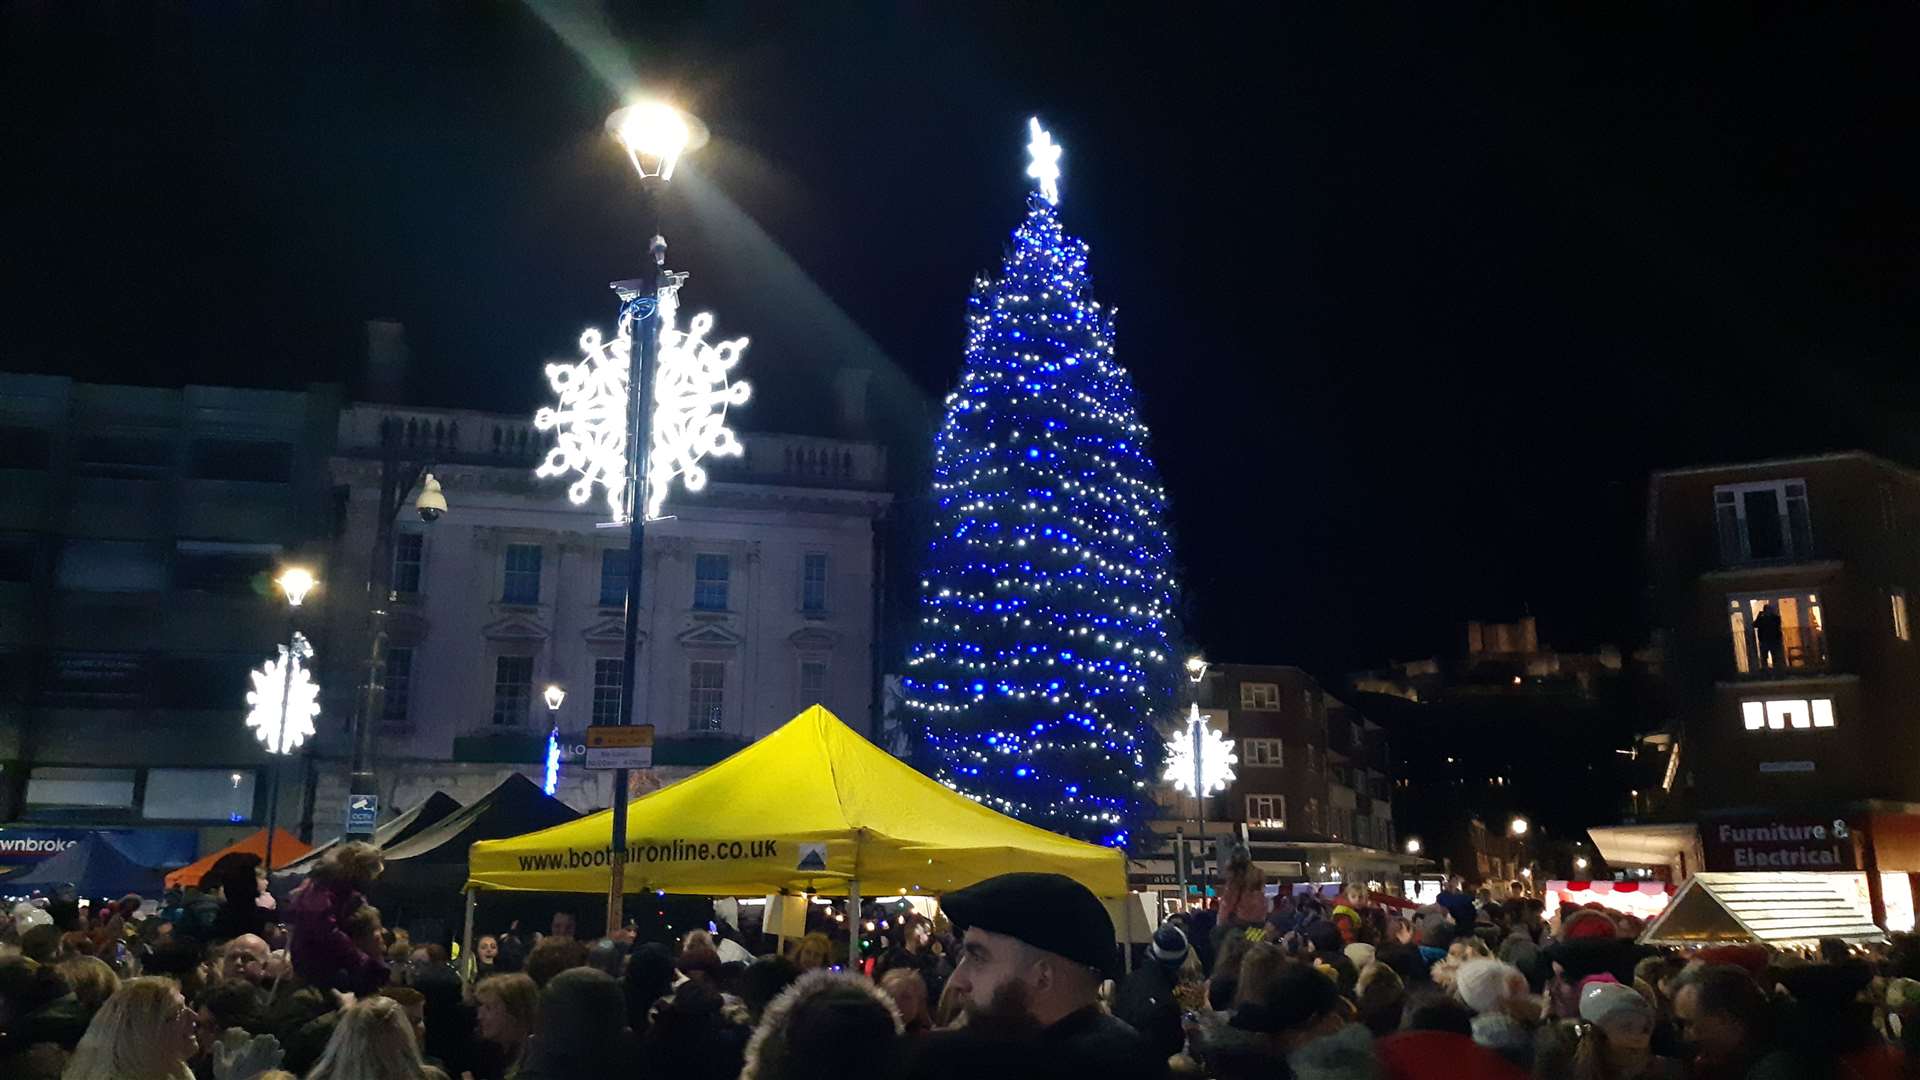 The splendidly lit Christmas tree after the switching on